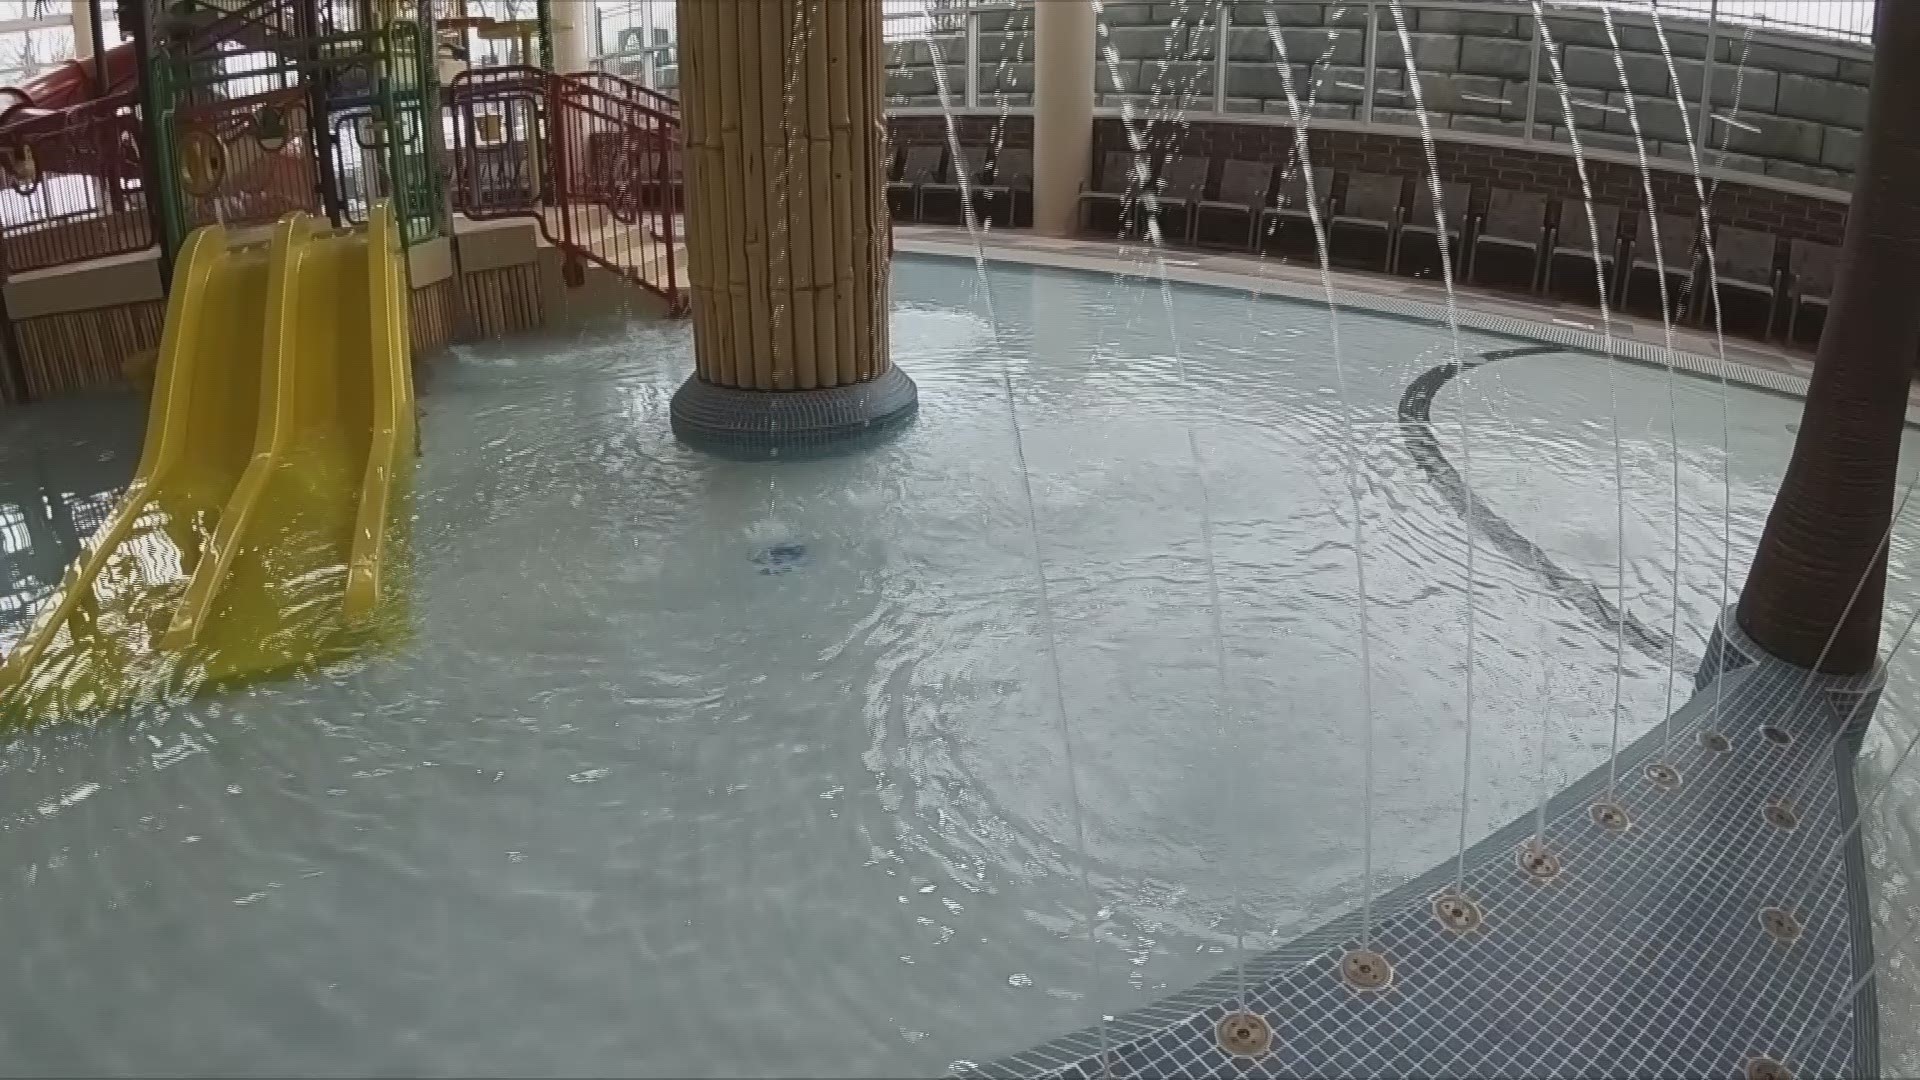 The newly expanded waterpark features more than 40 interactive water elements.